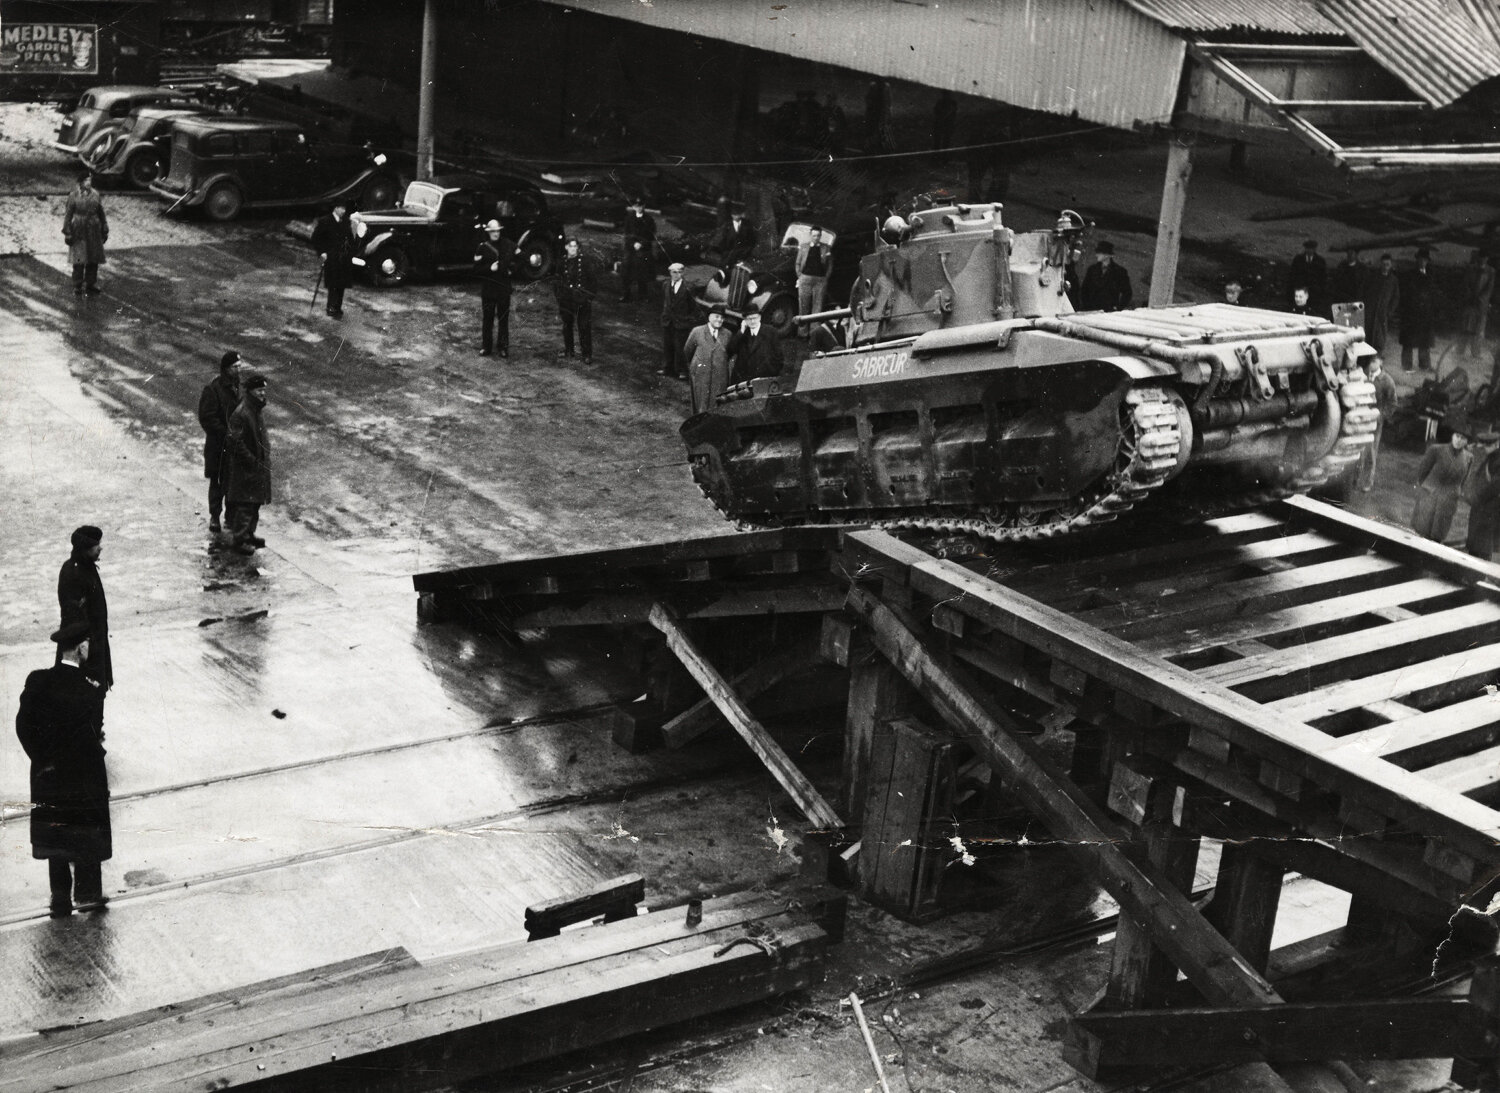 Tanks arriving prior to embarkation for the D Day landings, 1944 